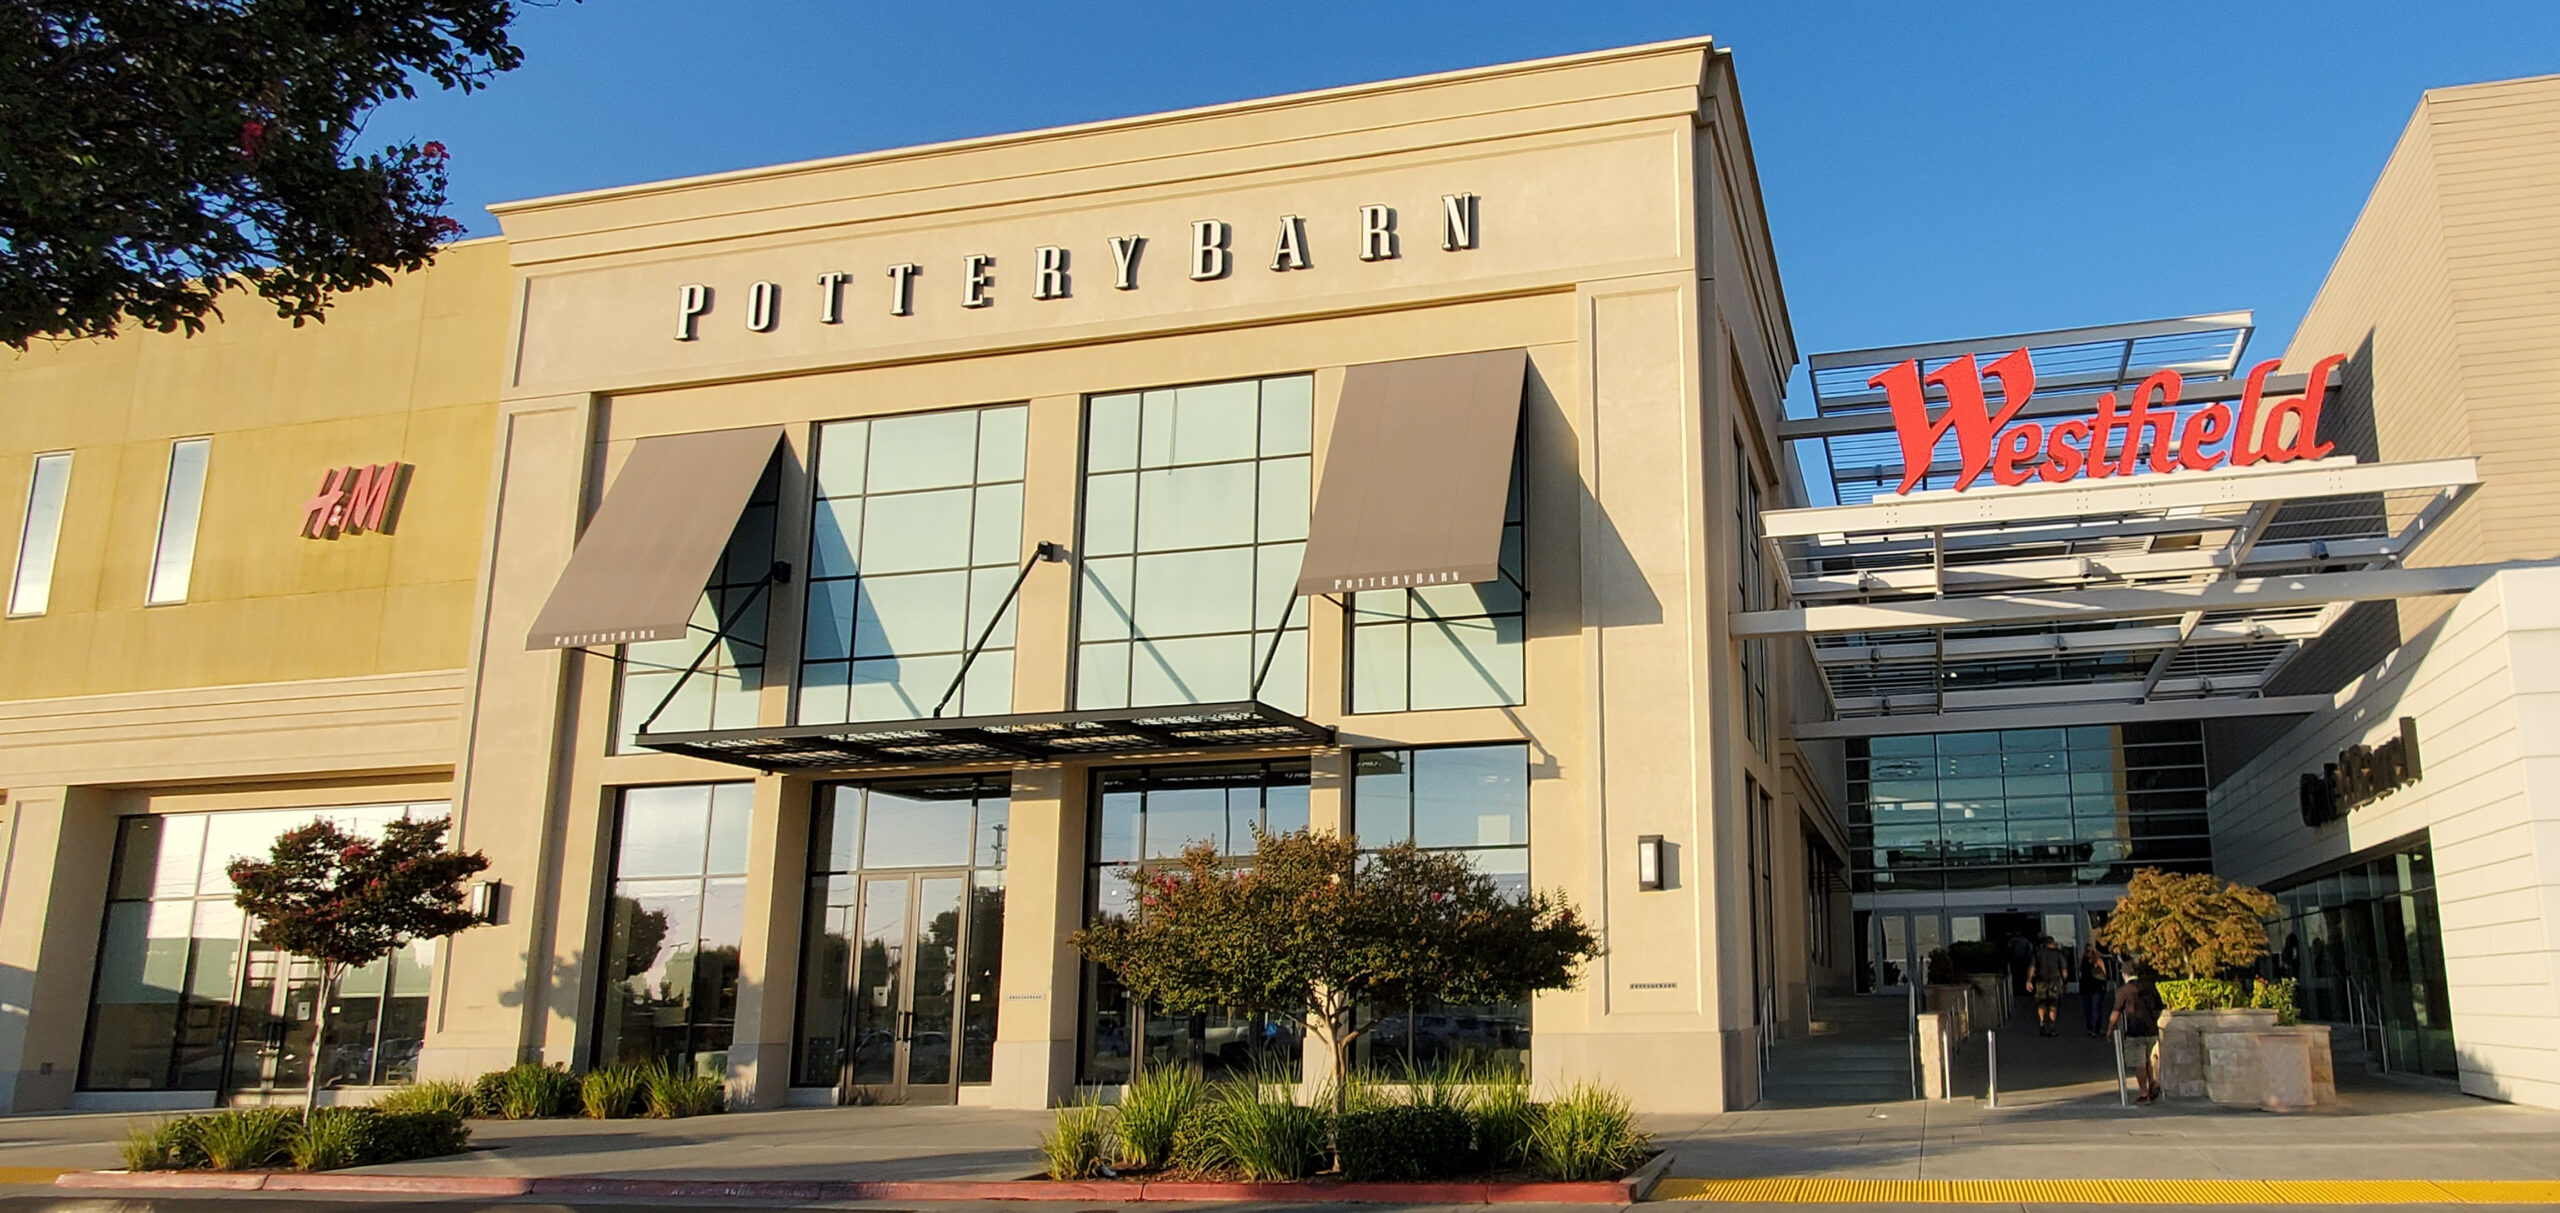 Registry Event - Pottery Barn at Westfield Galleria, Roseville - JD  Productions